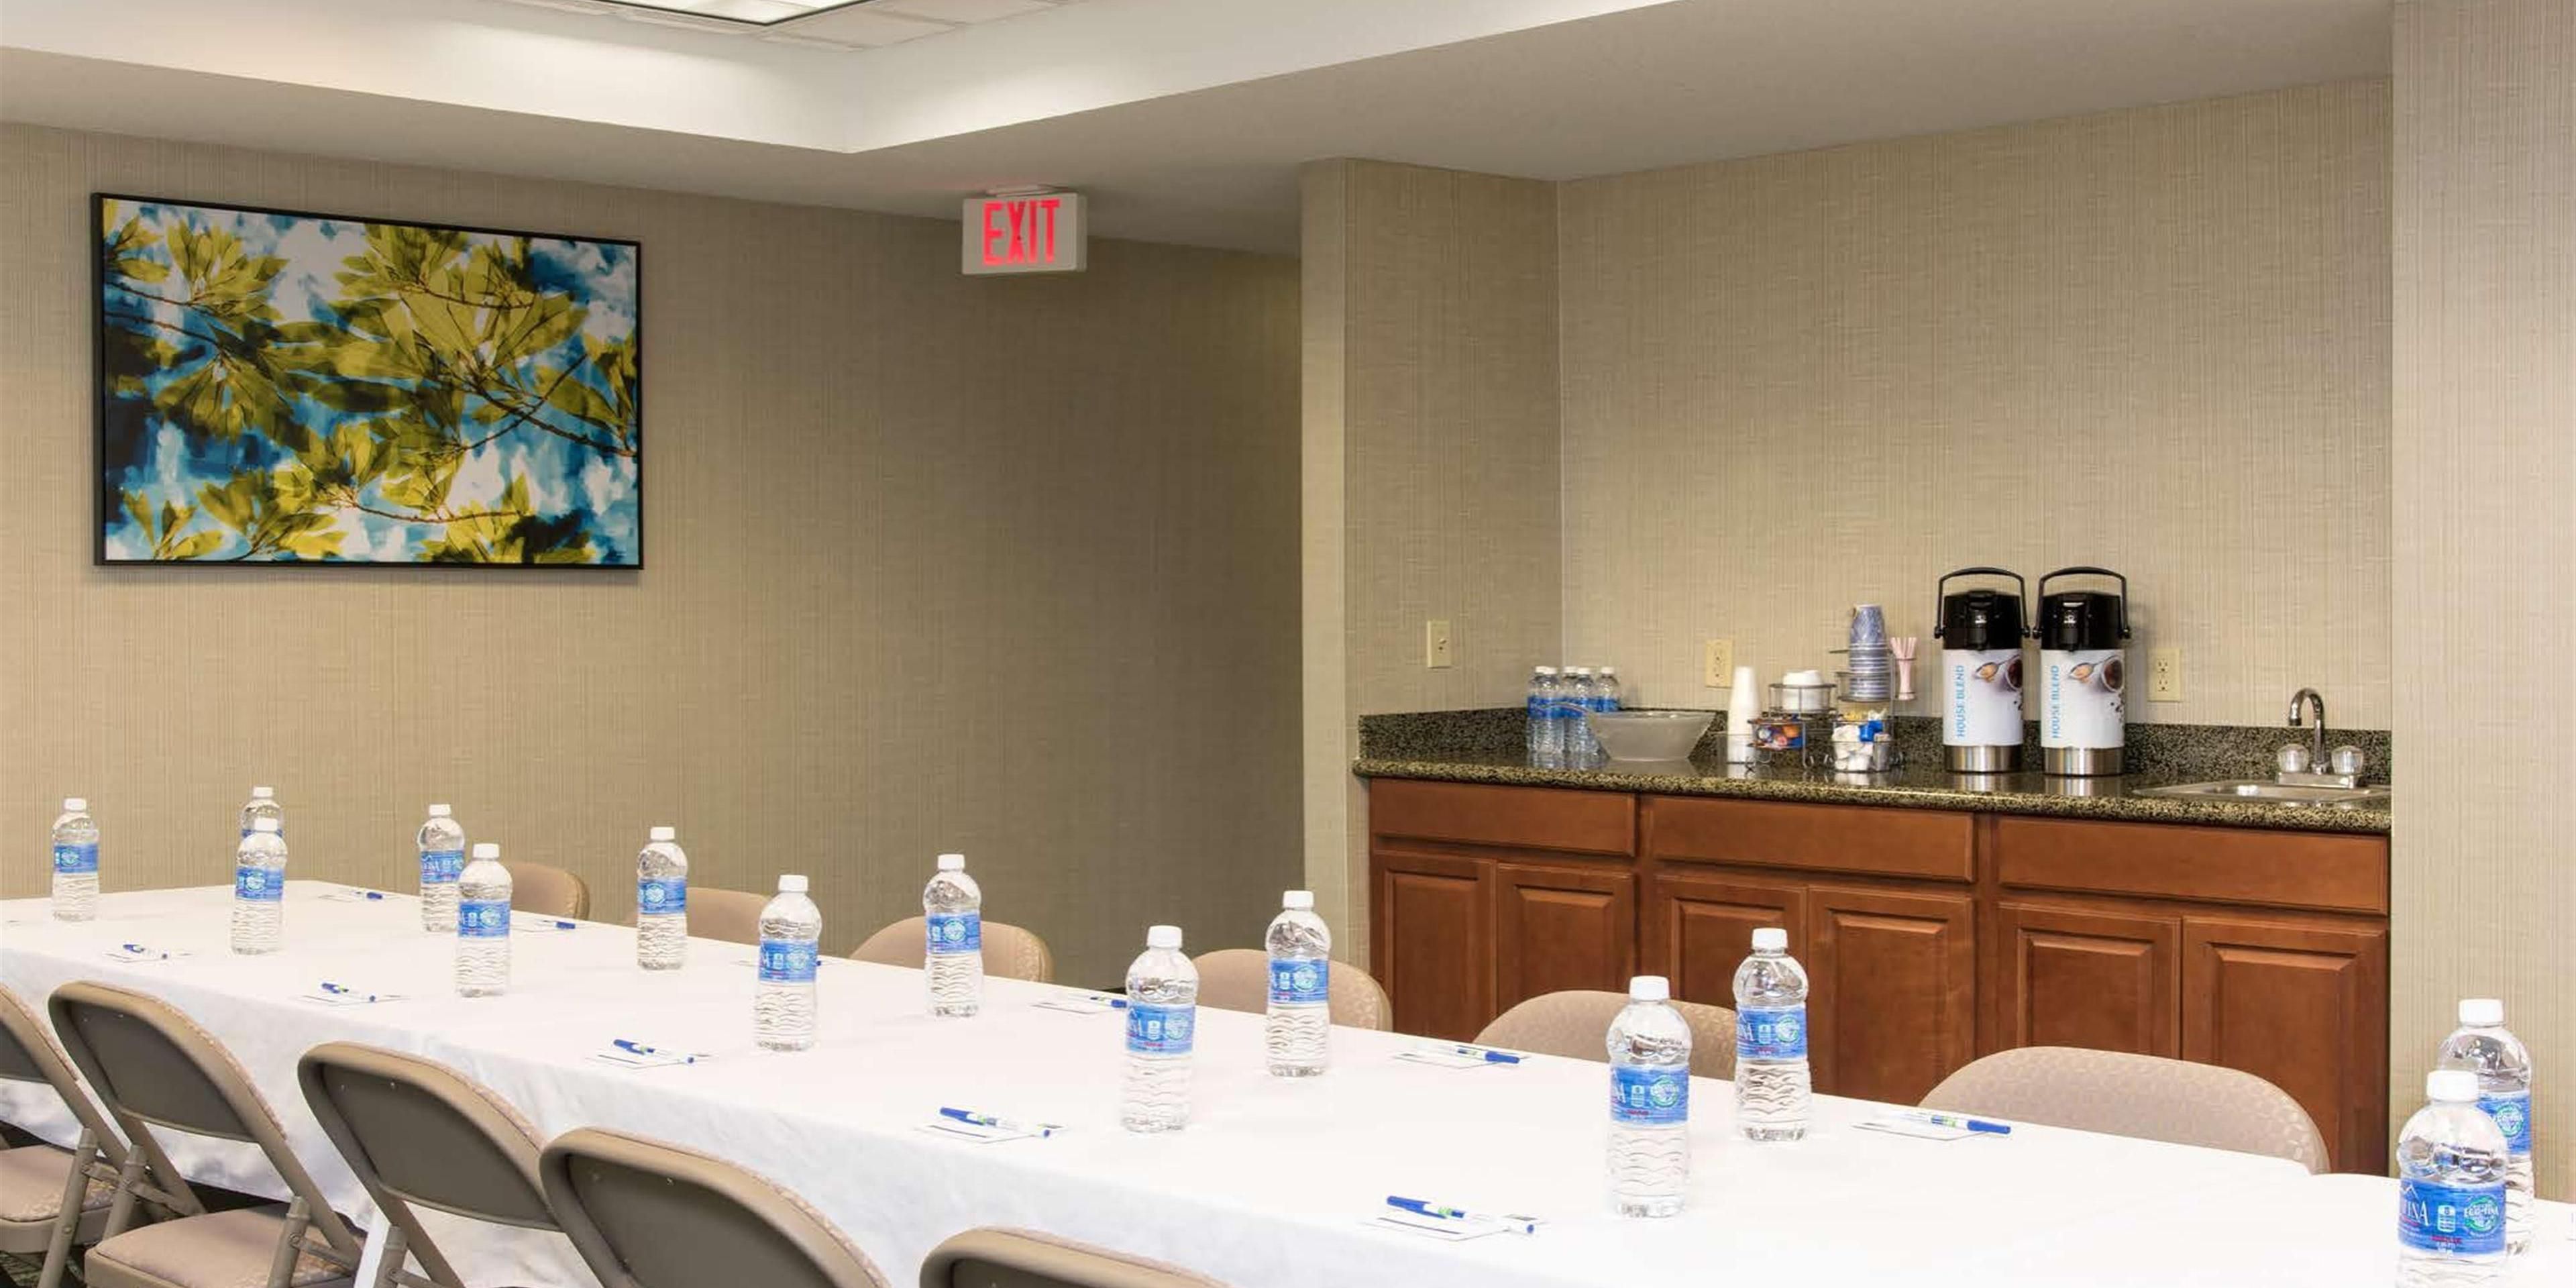 Contact the Holiday Inn Express Danville for all of your small meeting needs!  Let us take care of the details so you can be productive.